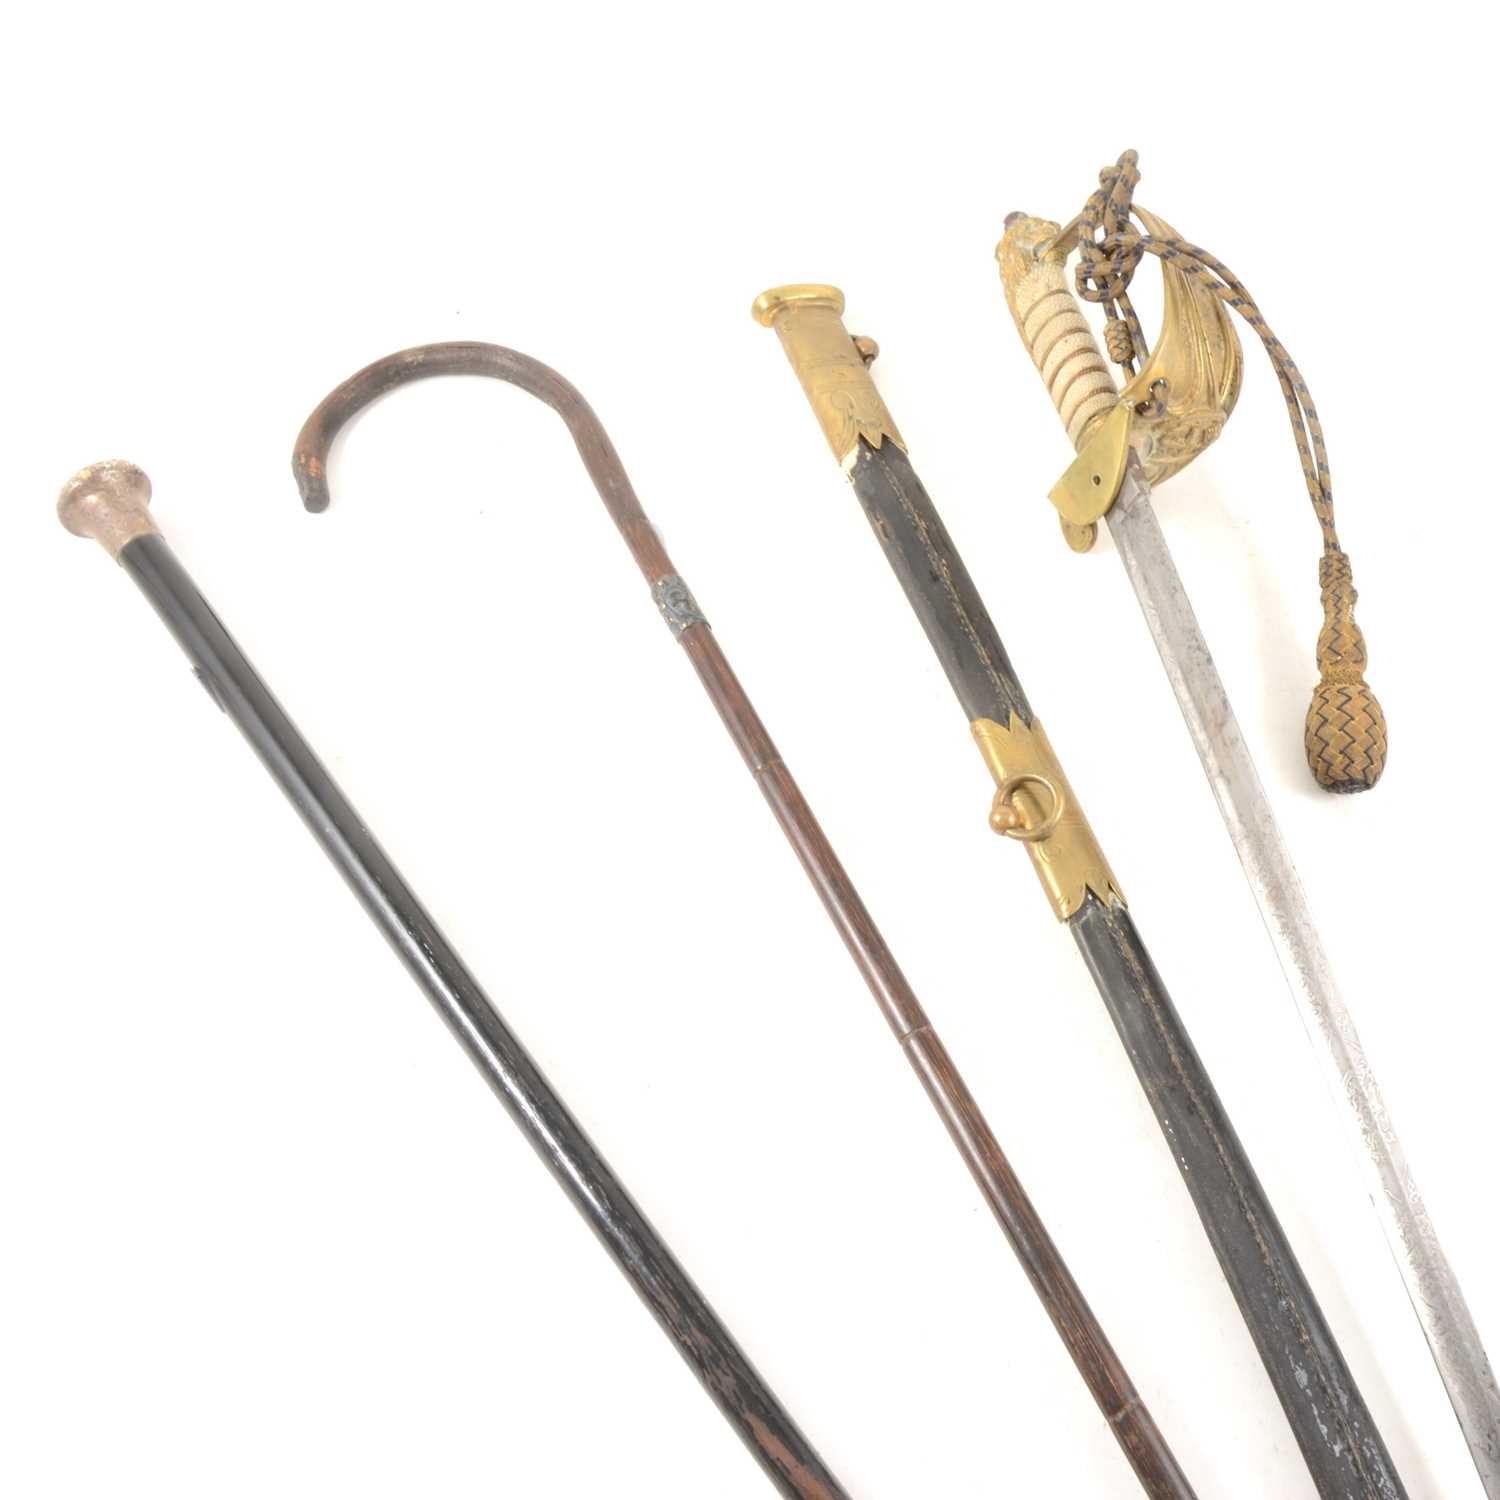 Lot 213 - A Royal Naval officer's sword, a walking stick, and a silver-capped cane